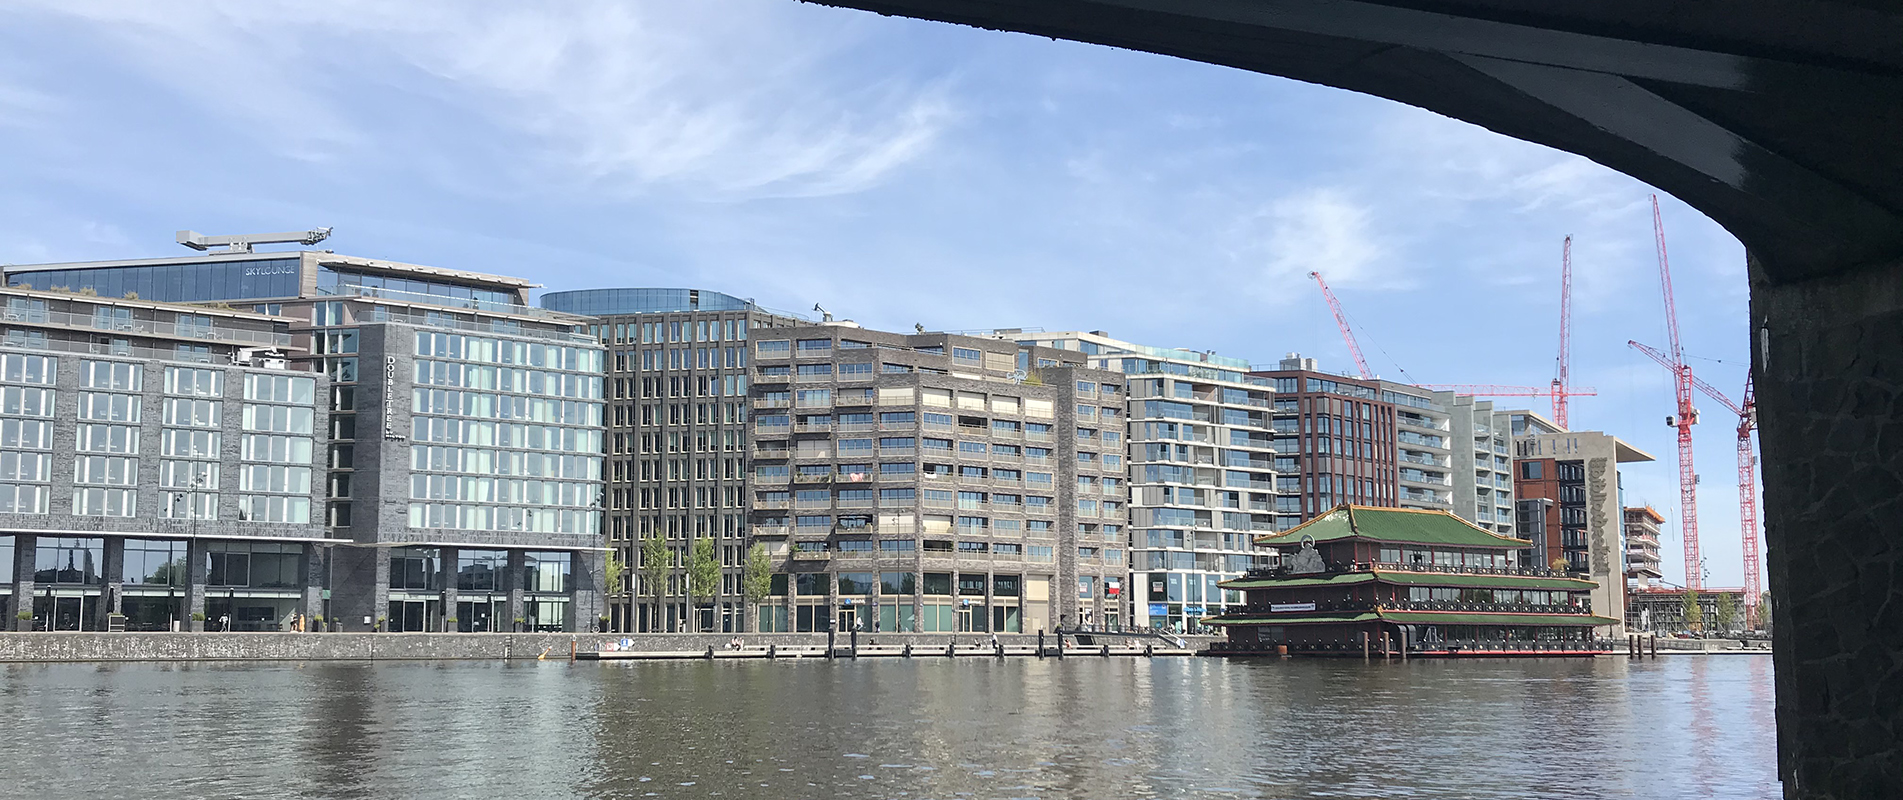 boat-tour-Amsterdam-Oosterdok-green-architecture-high tech